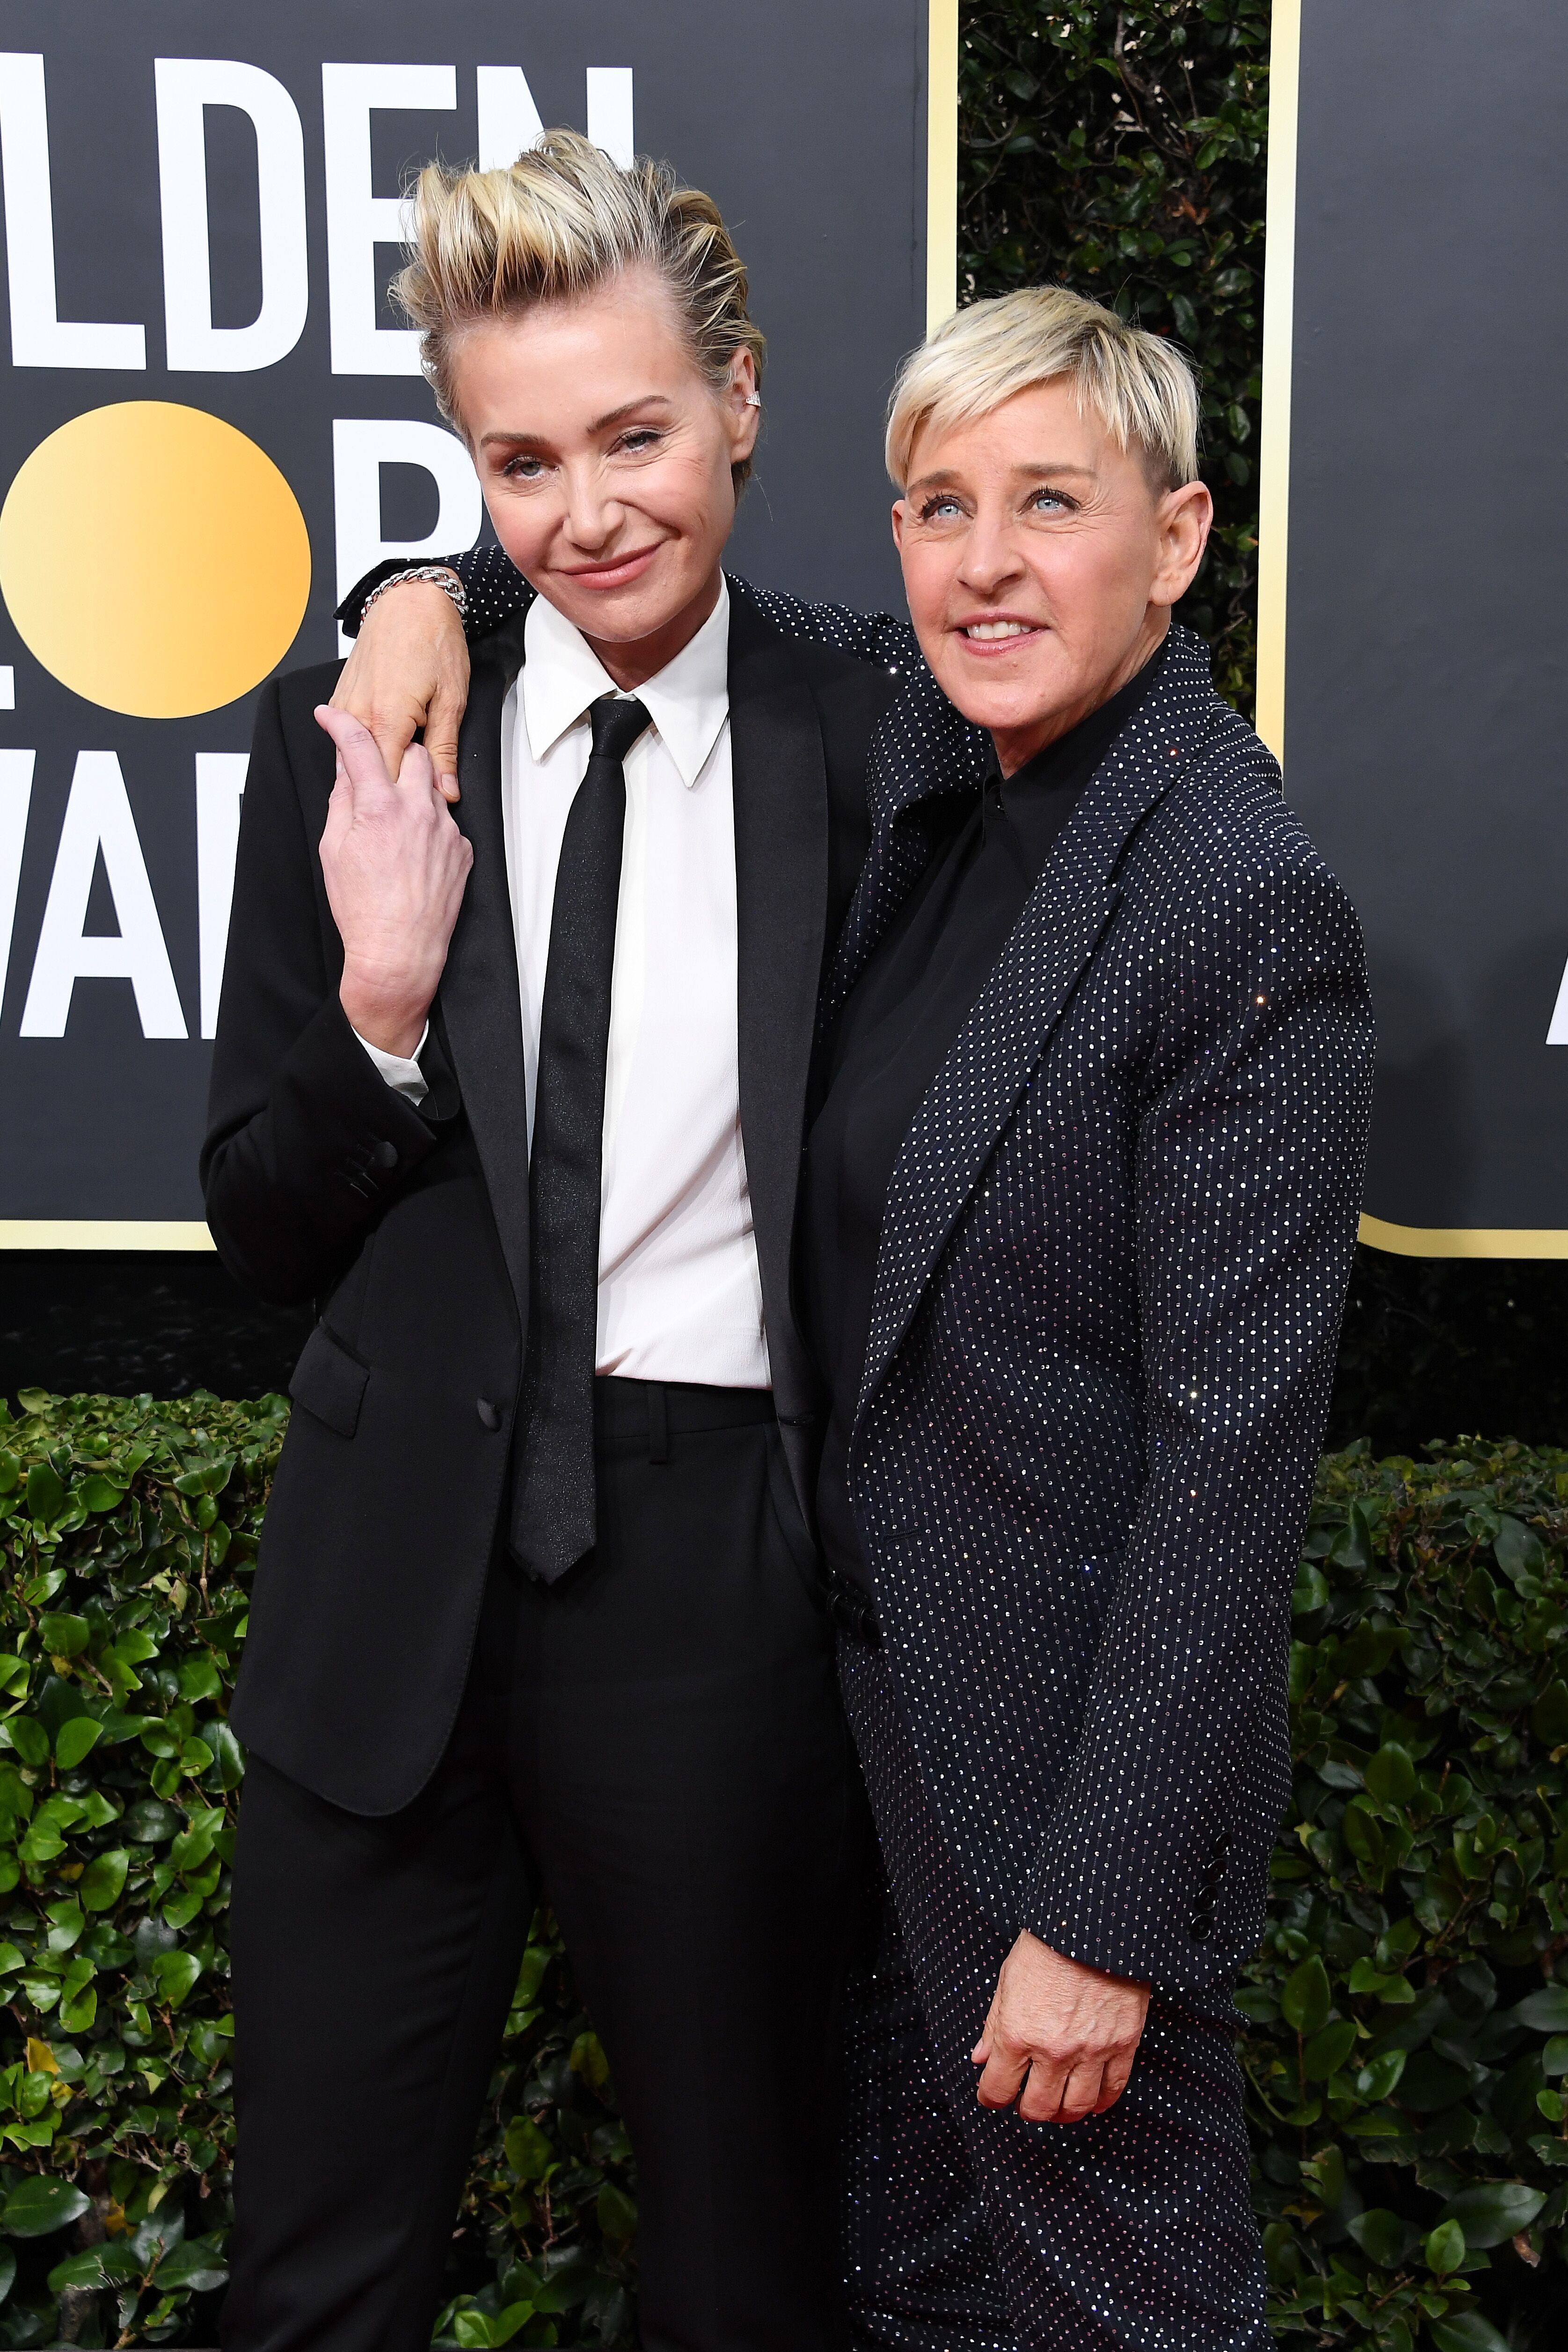  Portia de Rossi and Ellen DeGeneres a the 77th Annual Golden Globe Awards in 2020 | Source: Getty Images